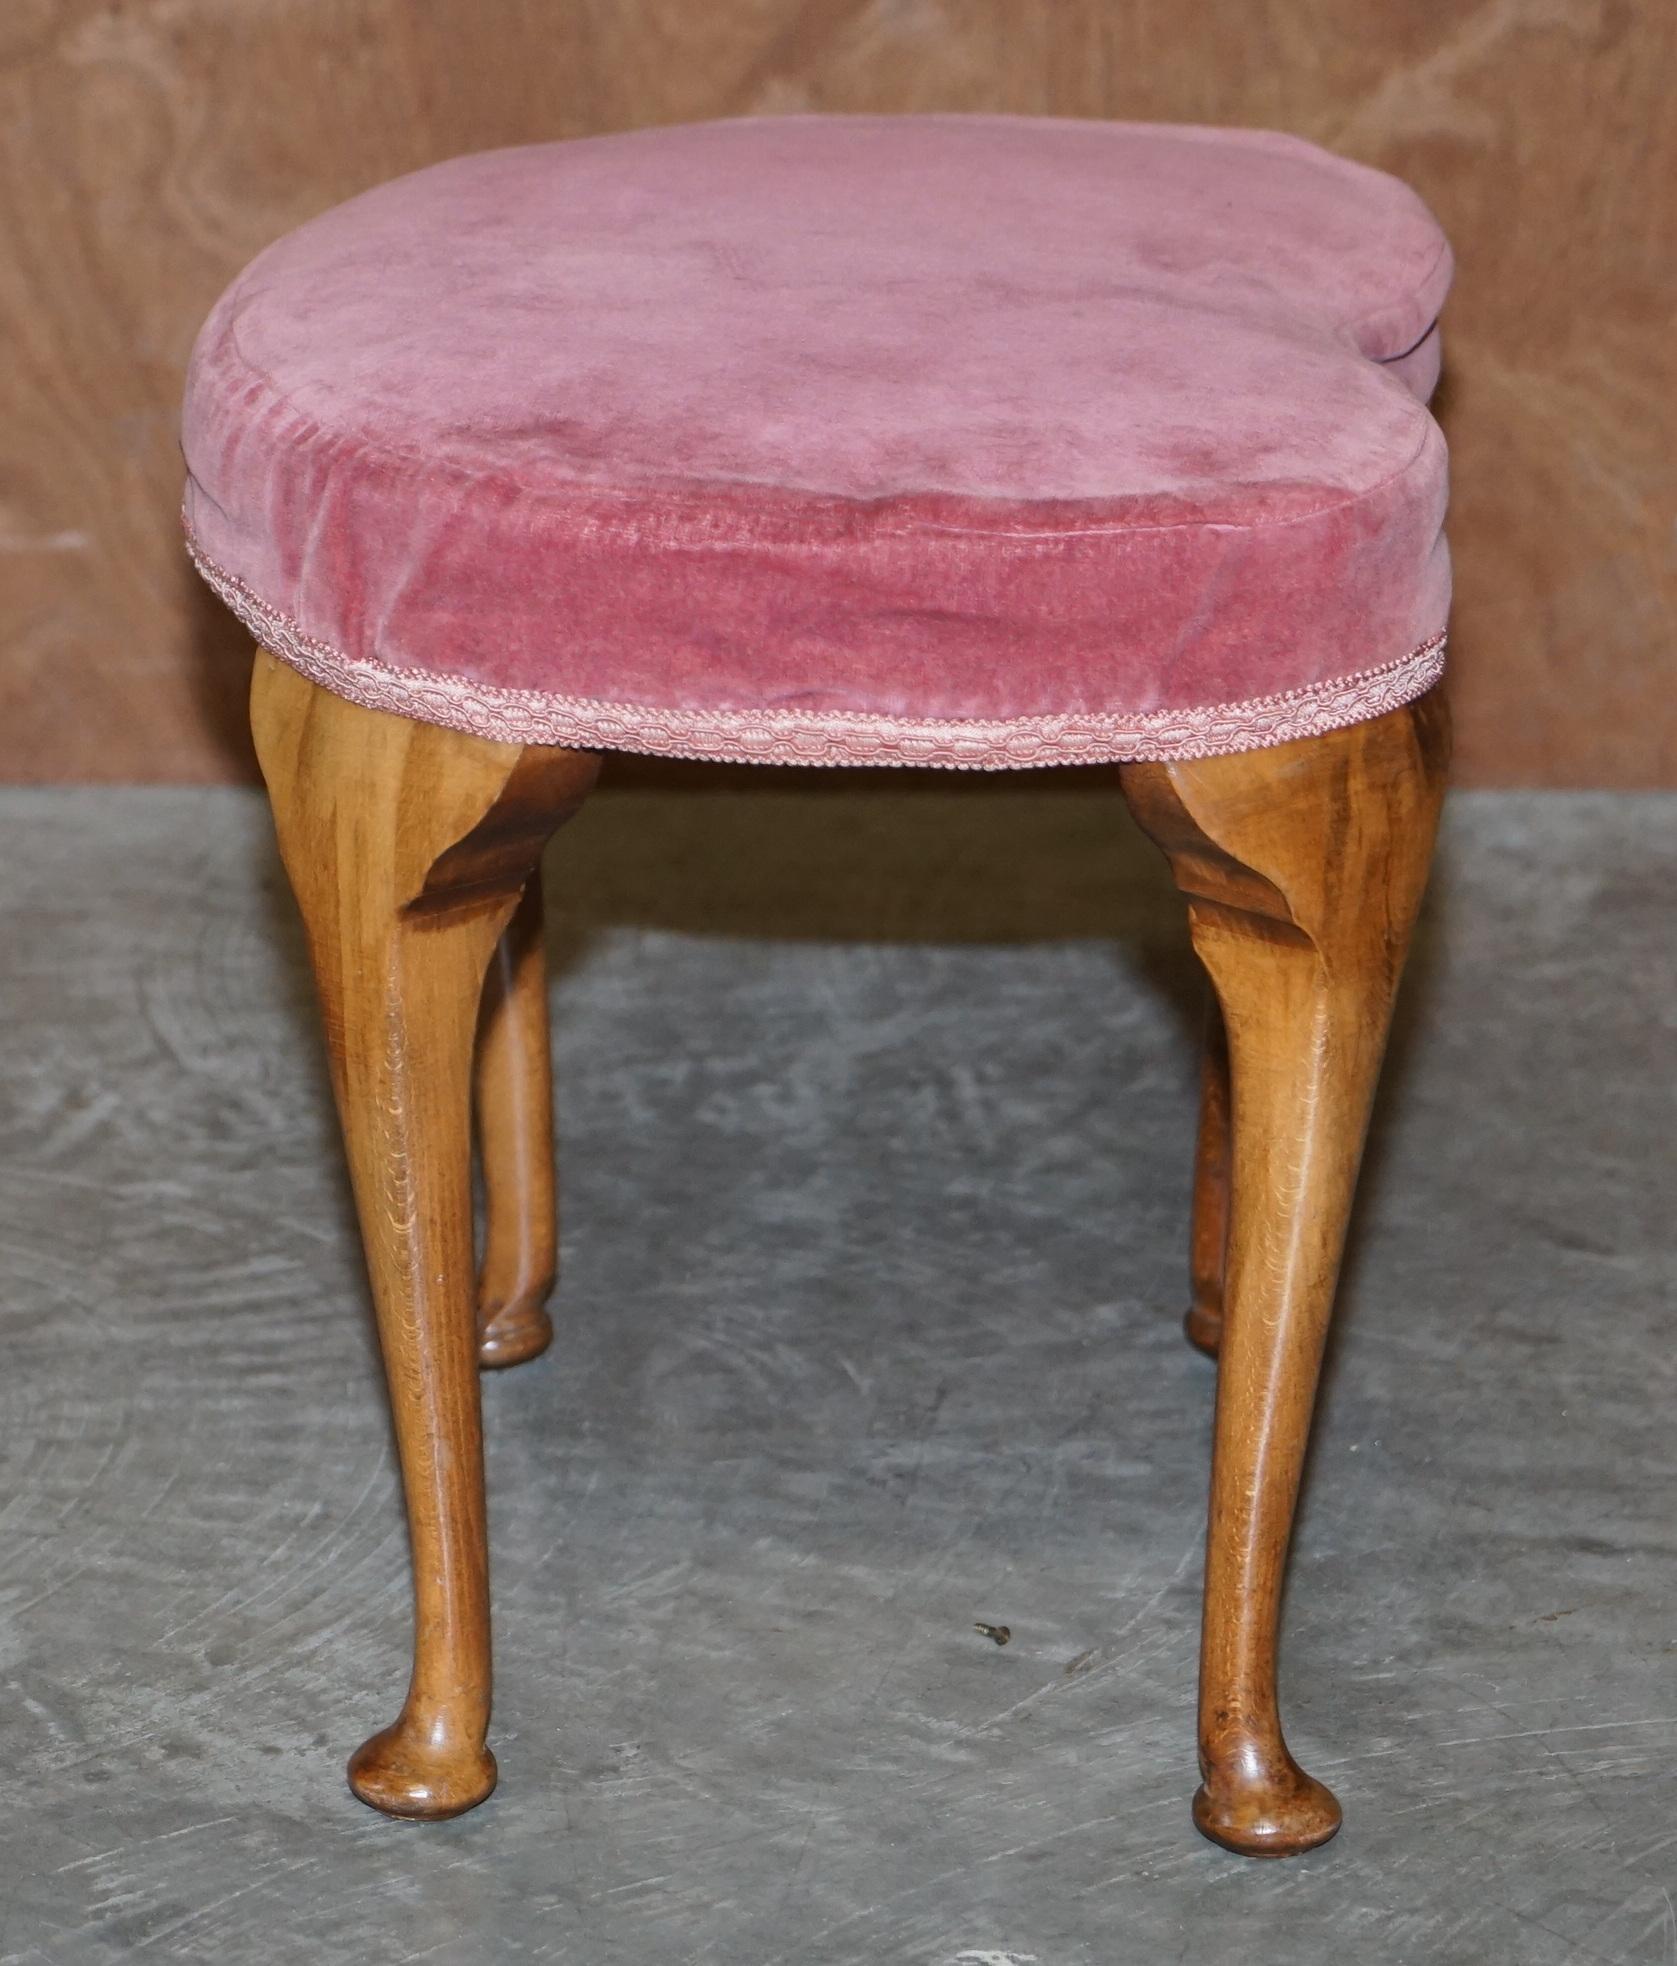 Early 20th Century Art Deco circa 1920 Antique Kidney Bean Shaped Dressing Table Stool Lovely Wood